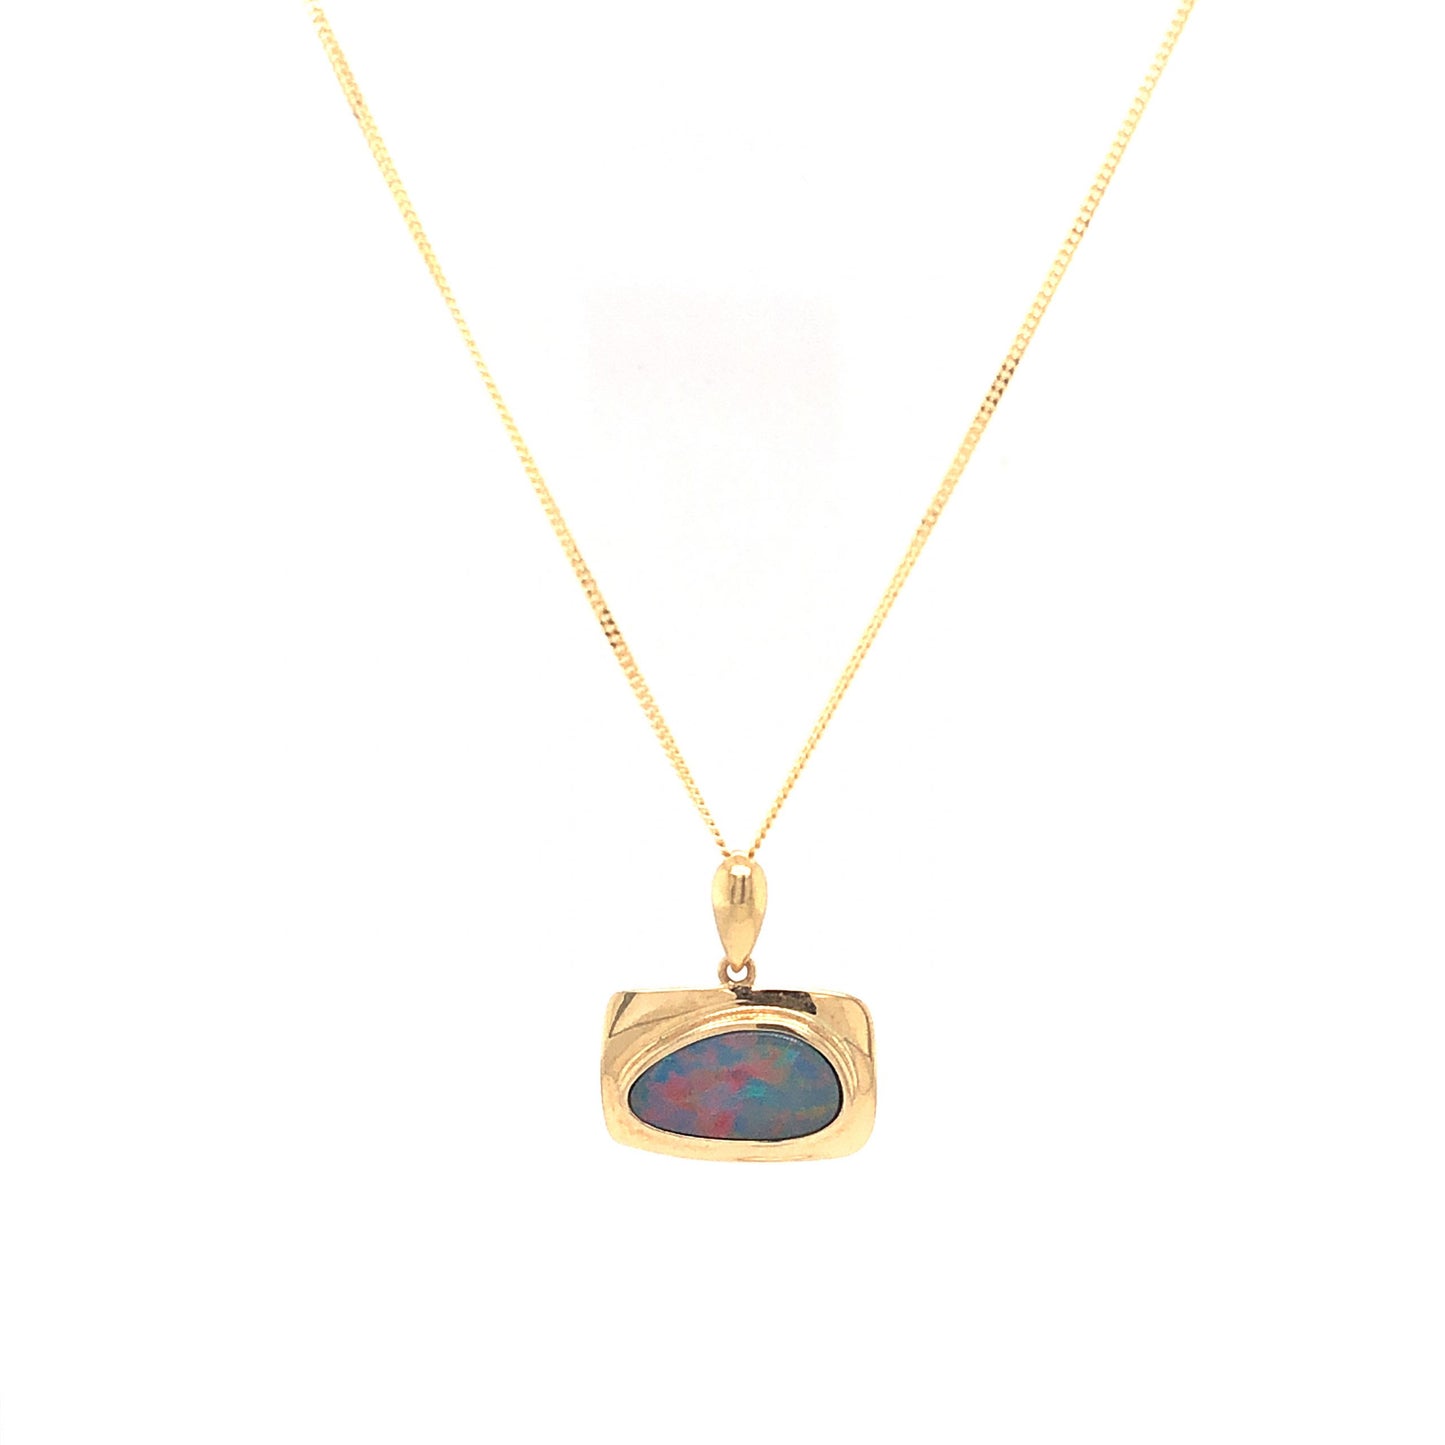 Black Boulder Opal Pendant Necklace in 18k Yellow Gold